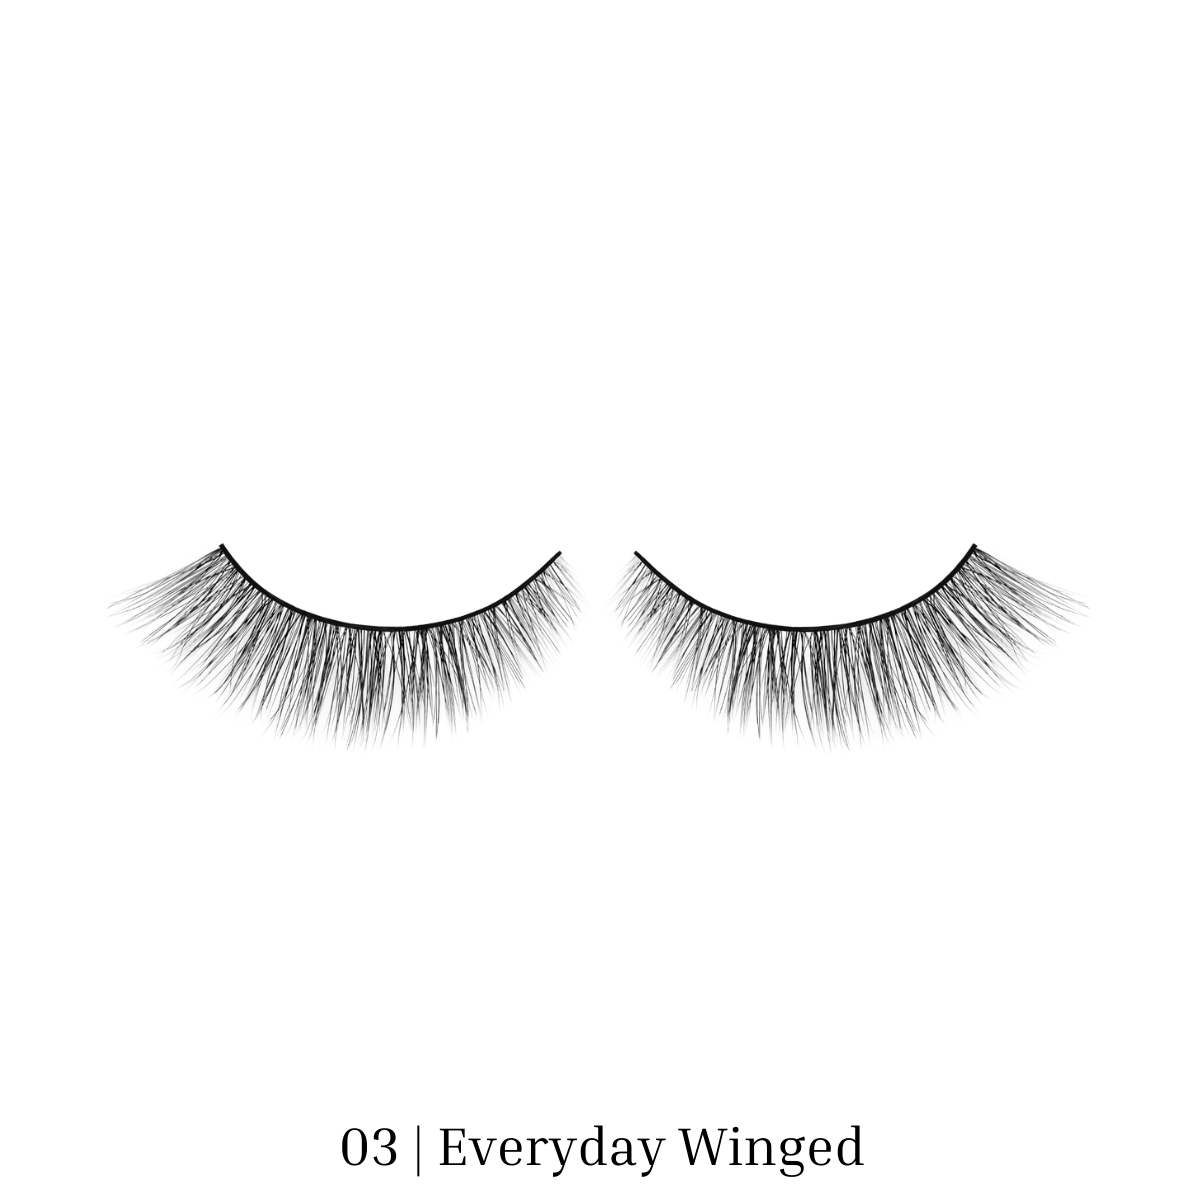 Lithe Lashes Bundle Deal Collections, Core Best Sellers Bundle, a product image of one of the three lashes, in this case 03 Everyday Winged, displayed as a single pair floating on a white background.